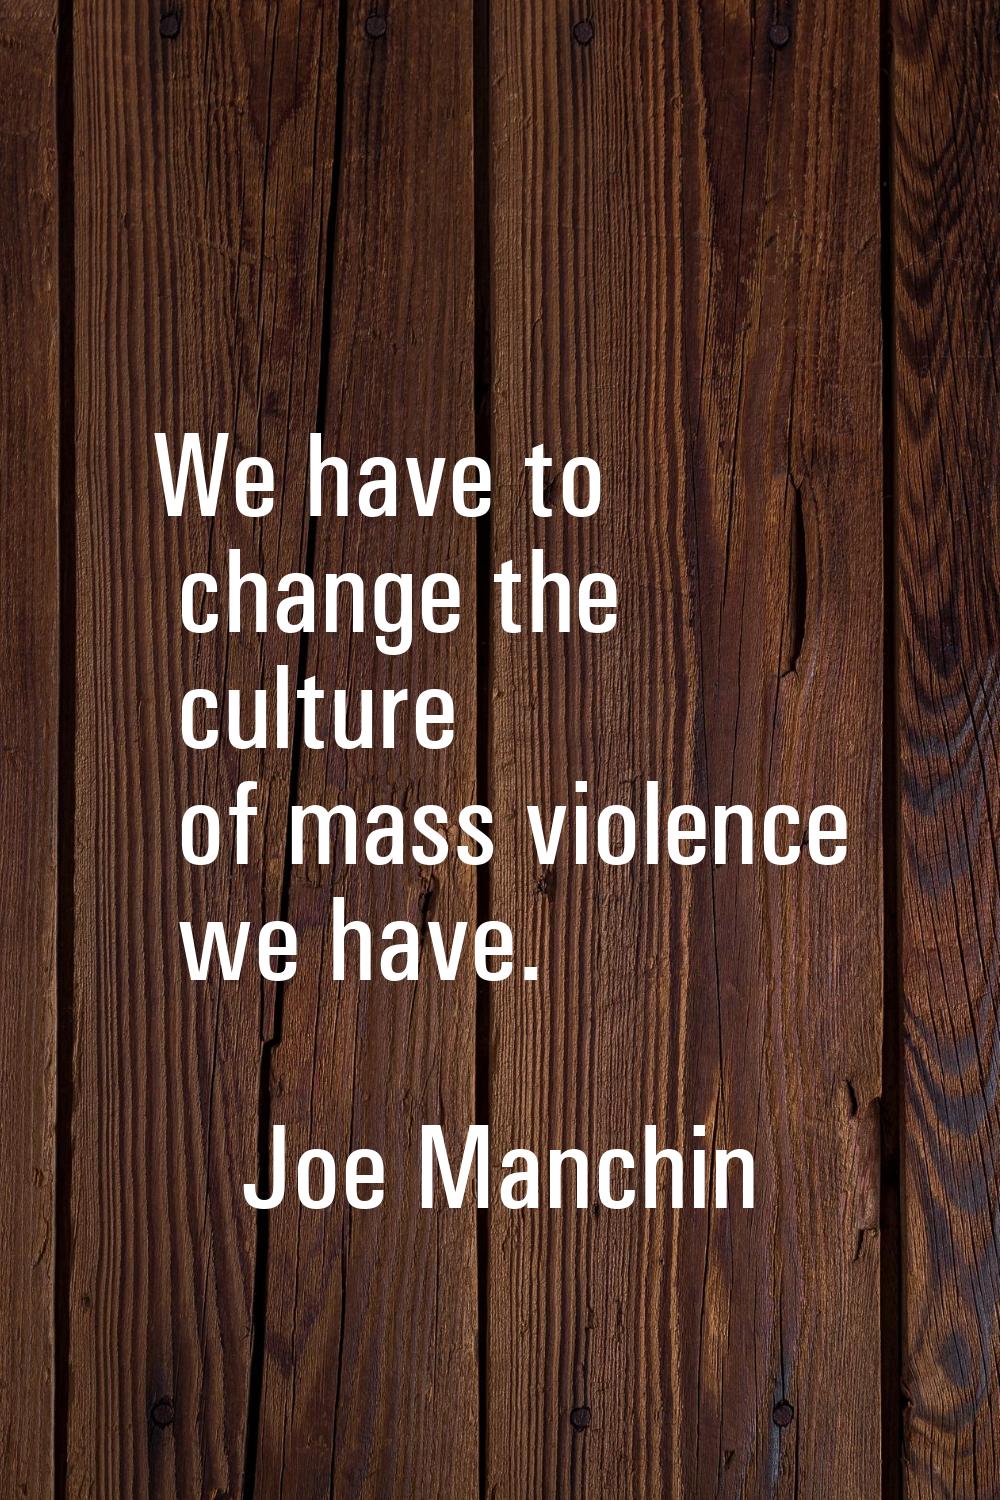 We have to change the culture of mass violence we have.